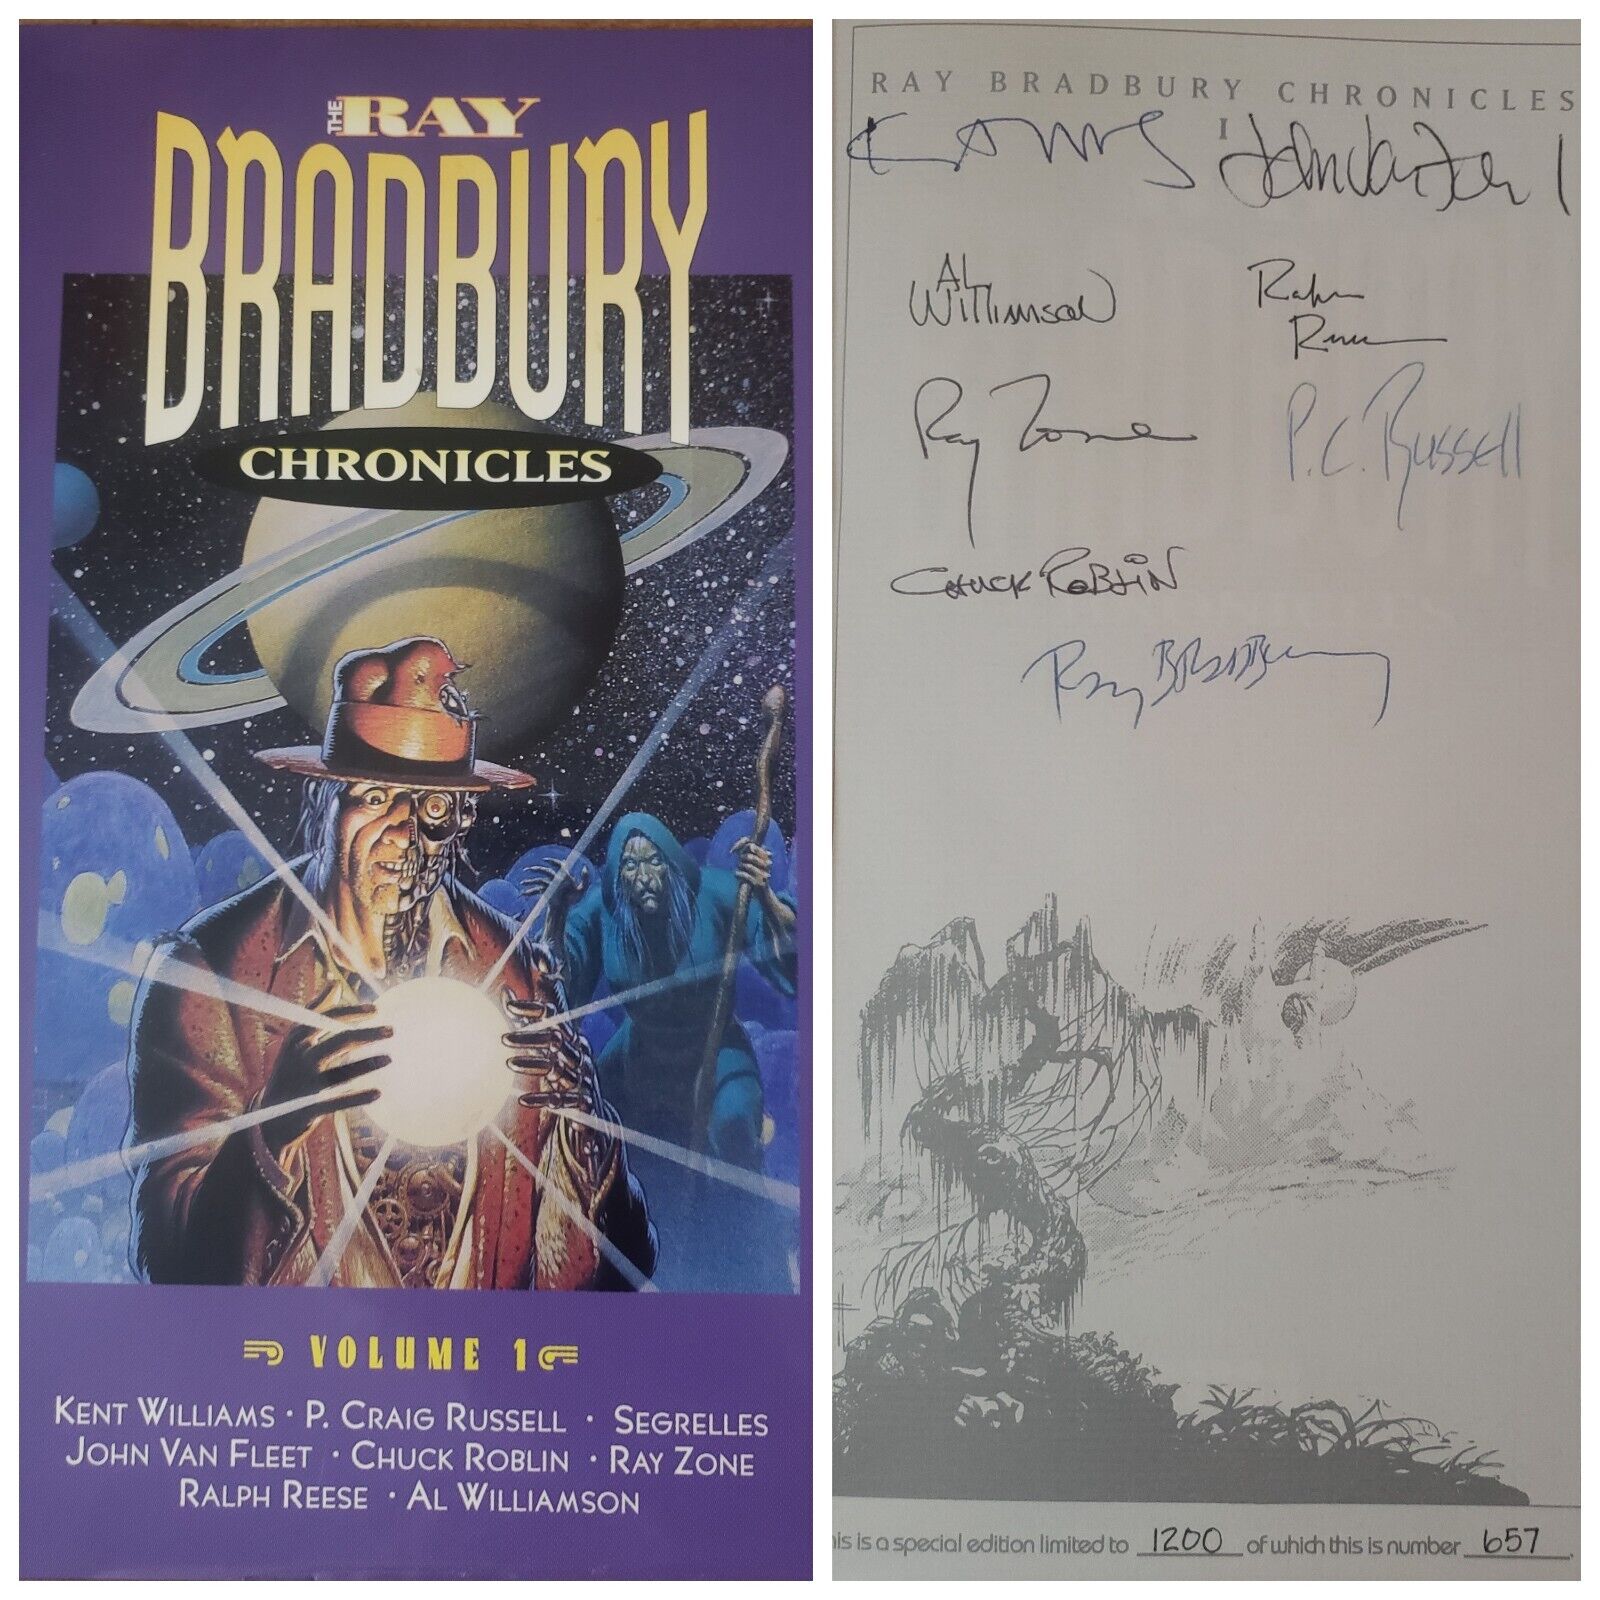 1992 The Ray Bradbury Chronicles Vol 1 HC Signed x8 & Numbered 657/1200 Russell